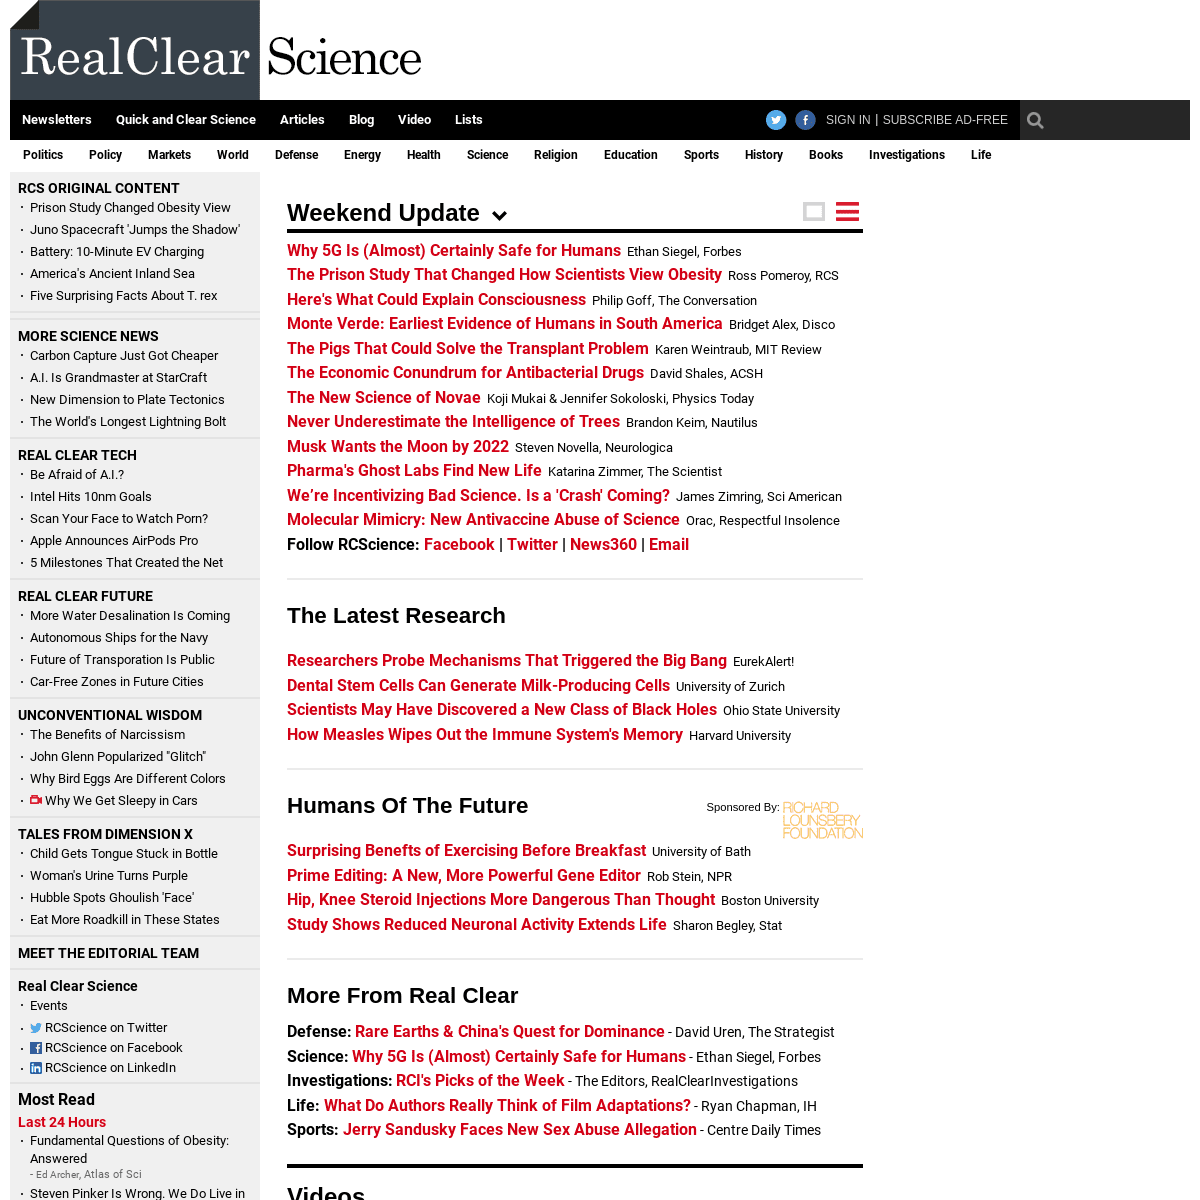 A complete backup of realclearscience.com